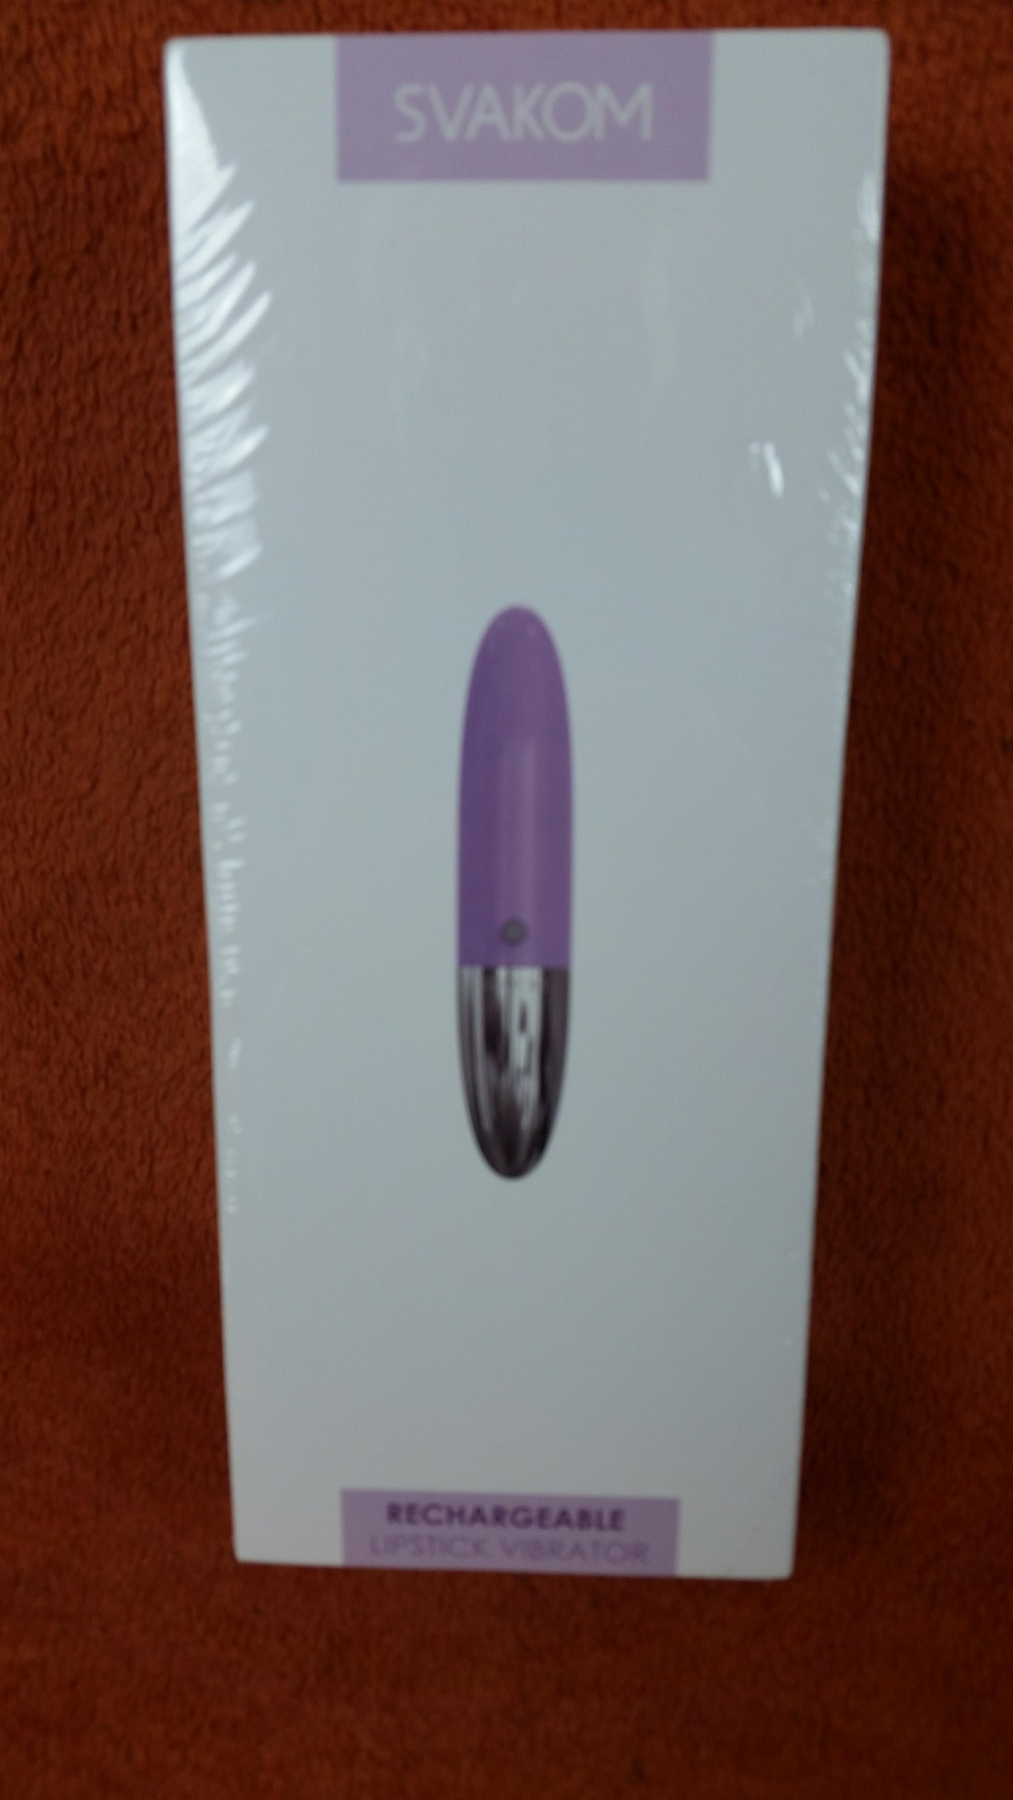 Passionate purple, pulsing pleasure!  Good things DO come in small packages!  Well made, durable, quiet motor, rechargeable, long battery life, lots of fun to play with!